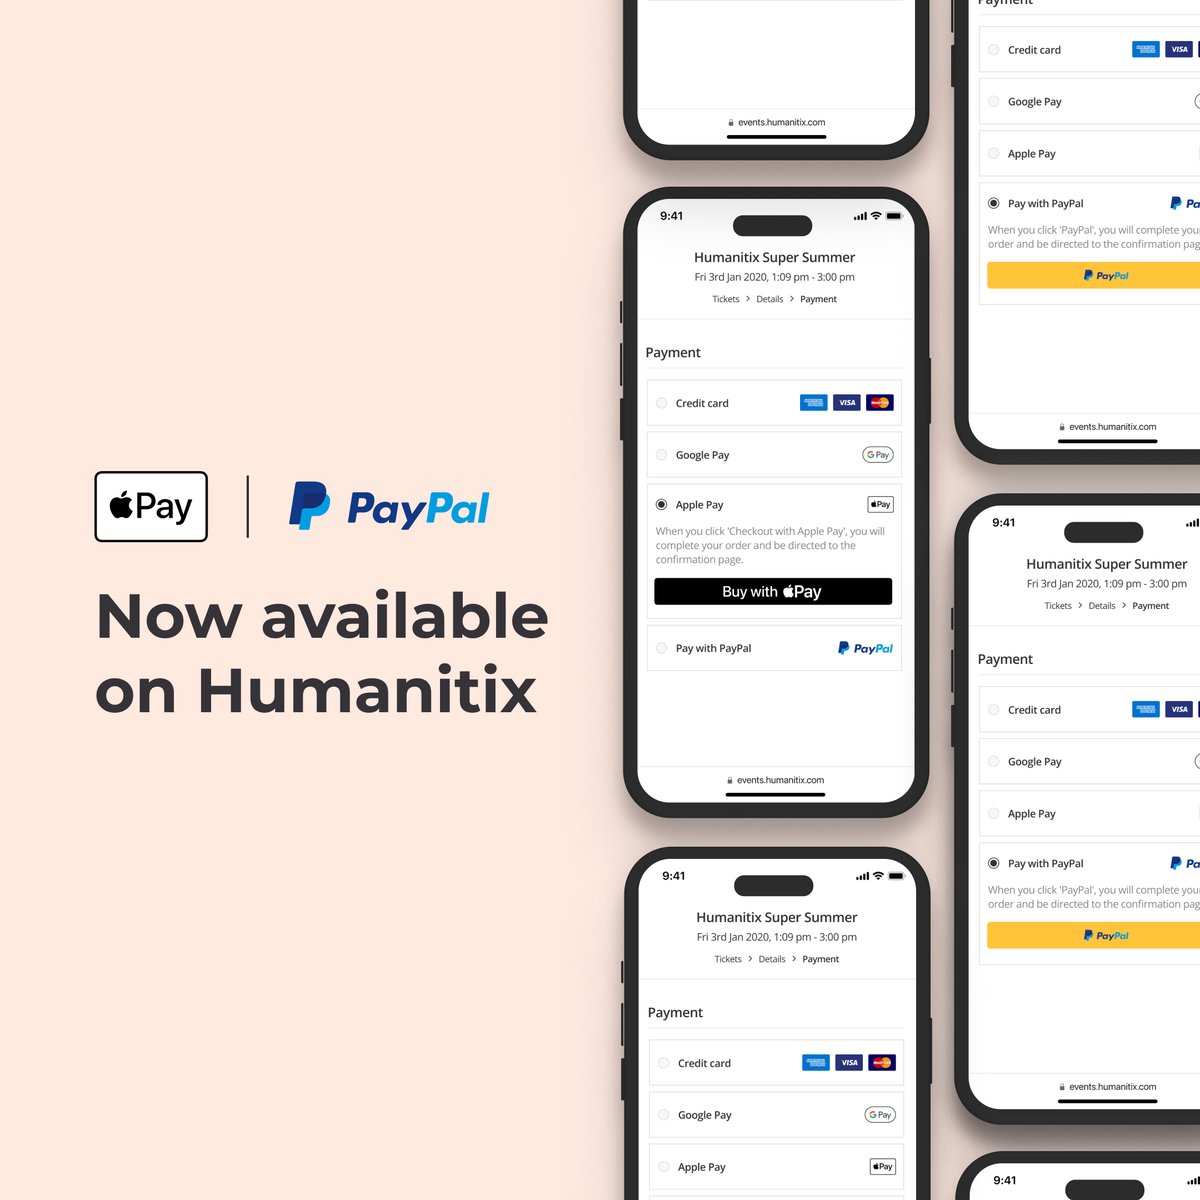 It finally happened. Apple Pay and PayPal are now live on Humanitix! As well as more options to pay for your tickets, it also means all your information can be pre-filled in one click with express checkout. Less hassle, more fun! Bring on the good times 🥳🎉💃